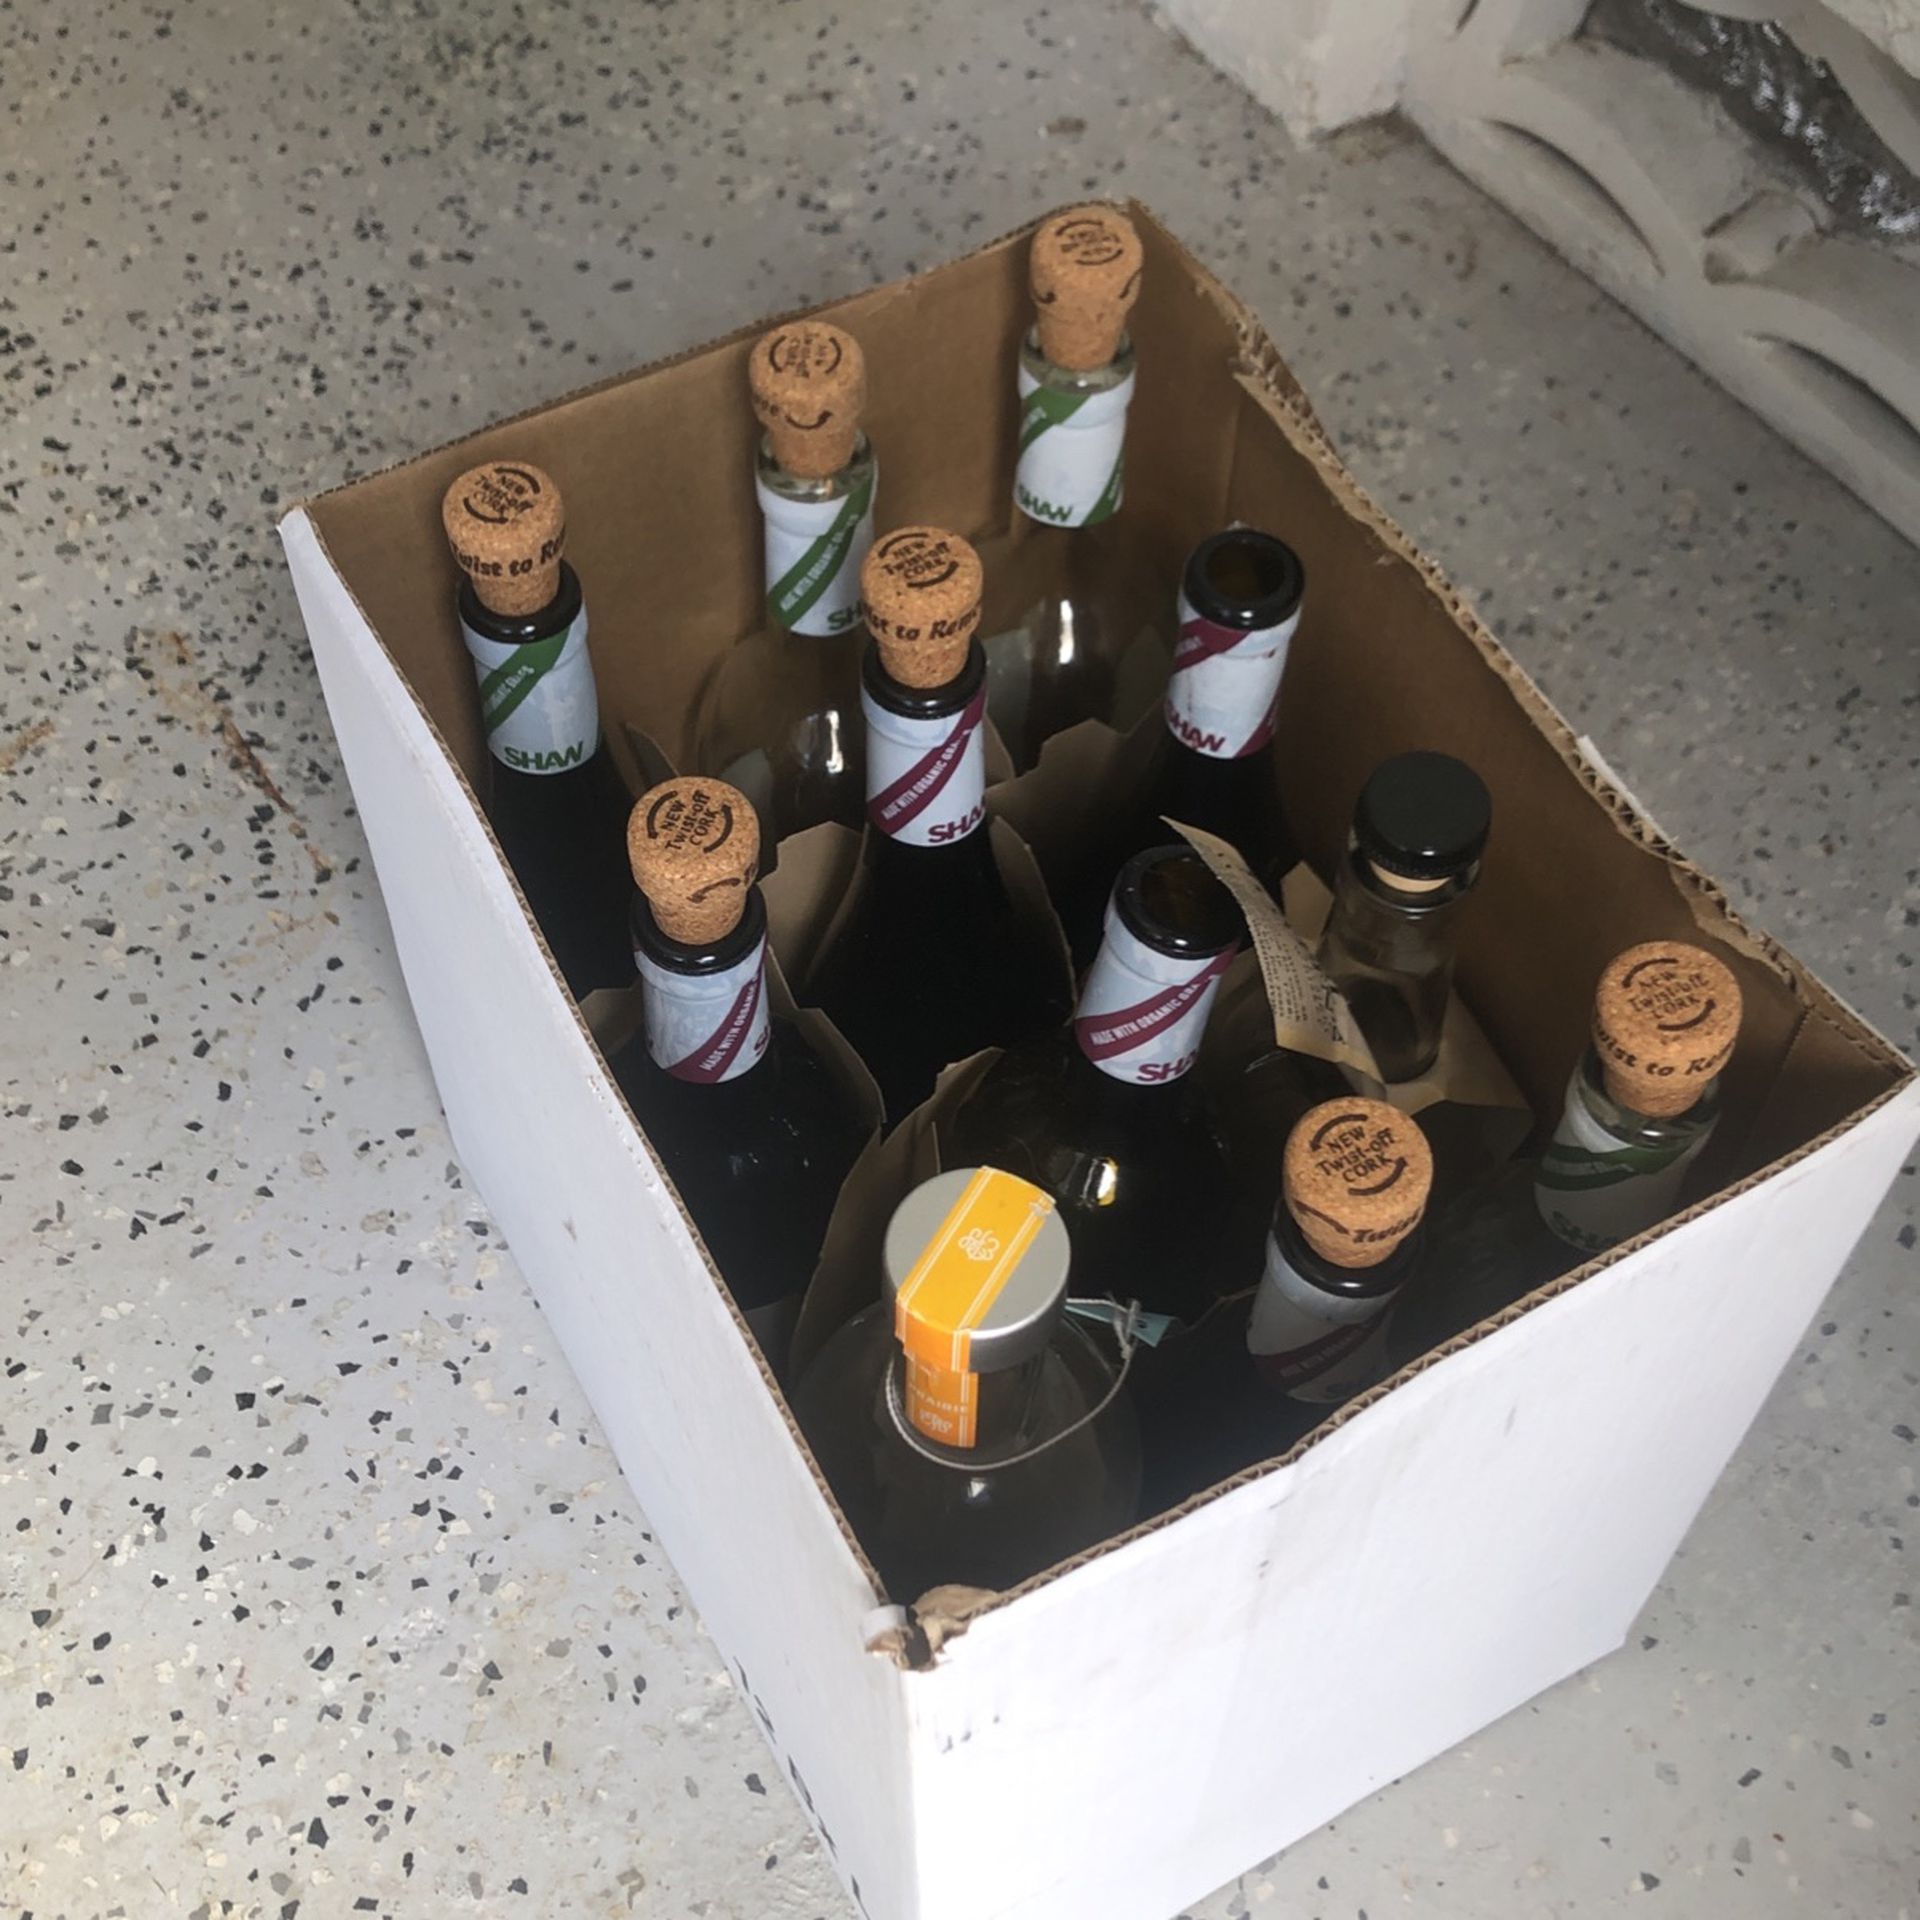 Free case of wine bottles with reusable corks